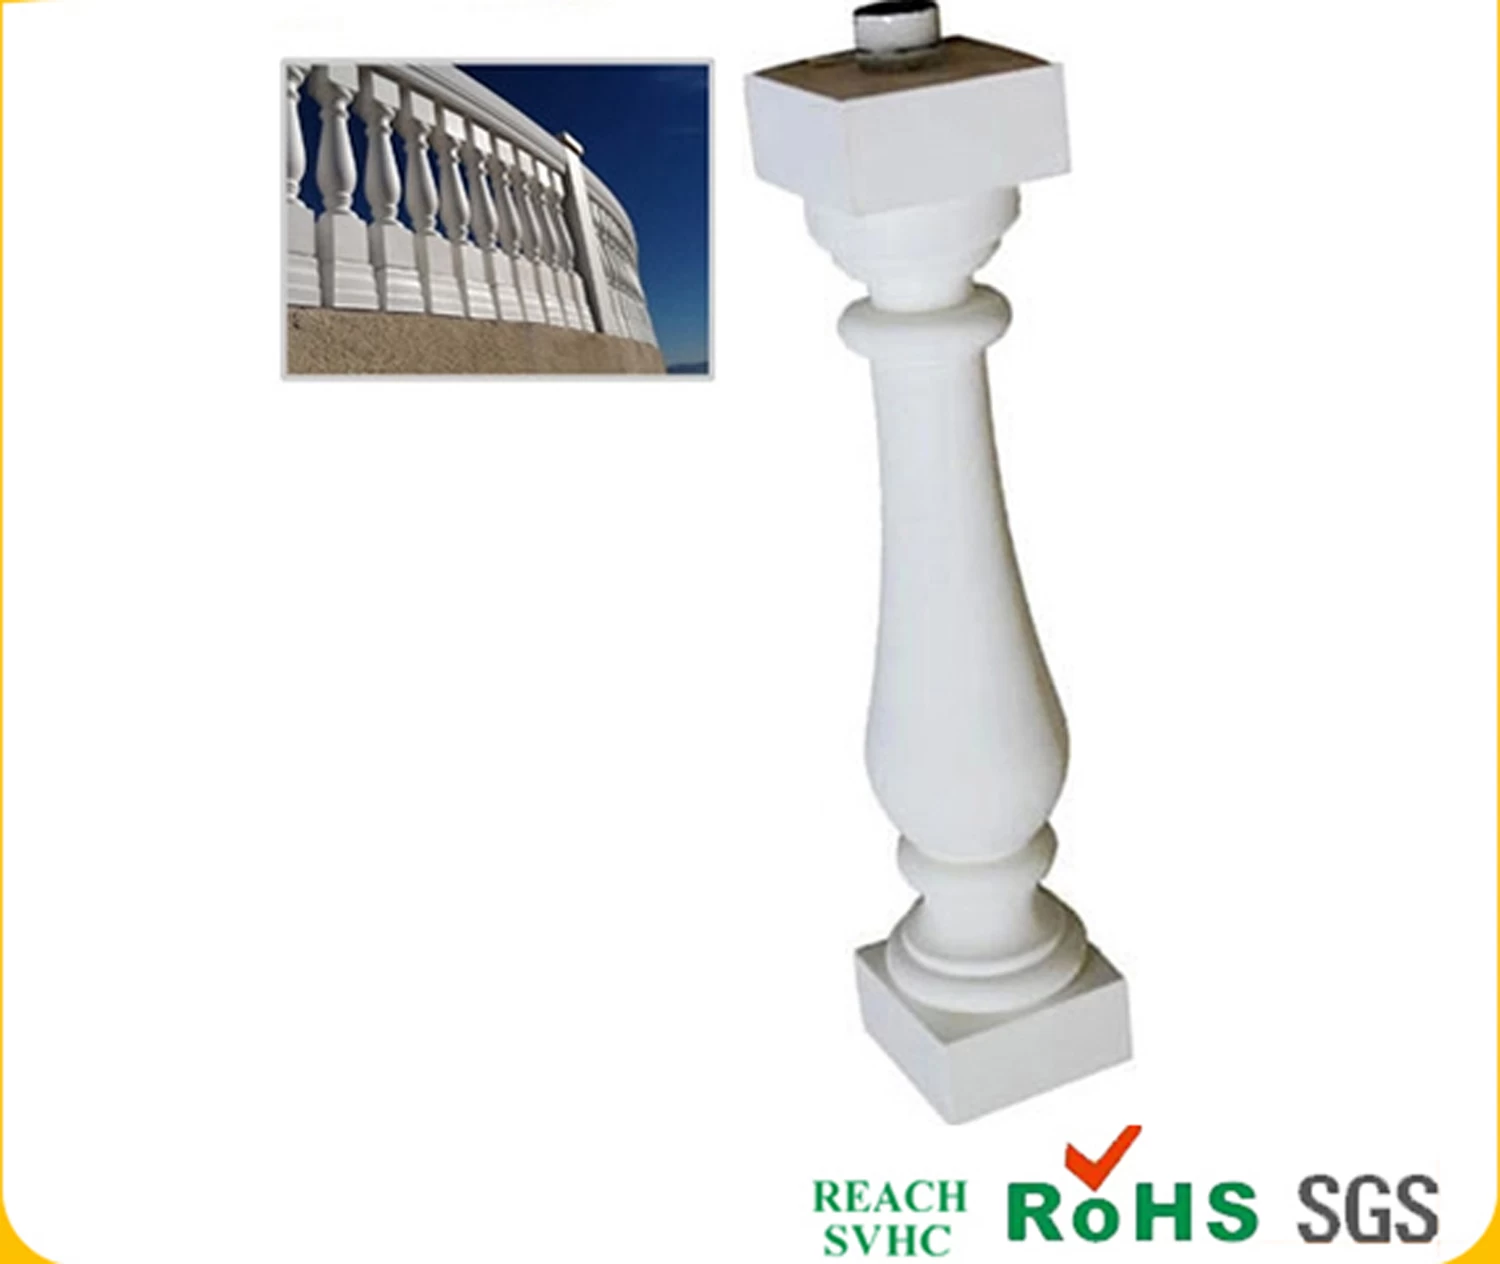 balusters foam, High quality durable of PU balusters,	pu plastic balustrade outdoor,	staircase balustrade,	interior railings